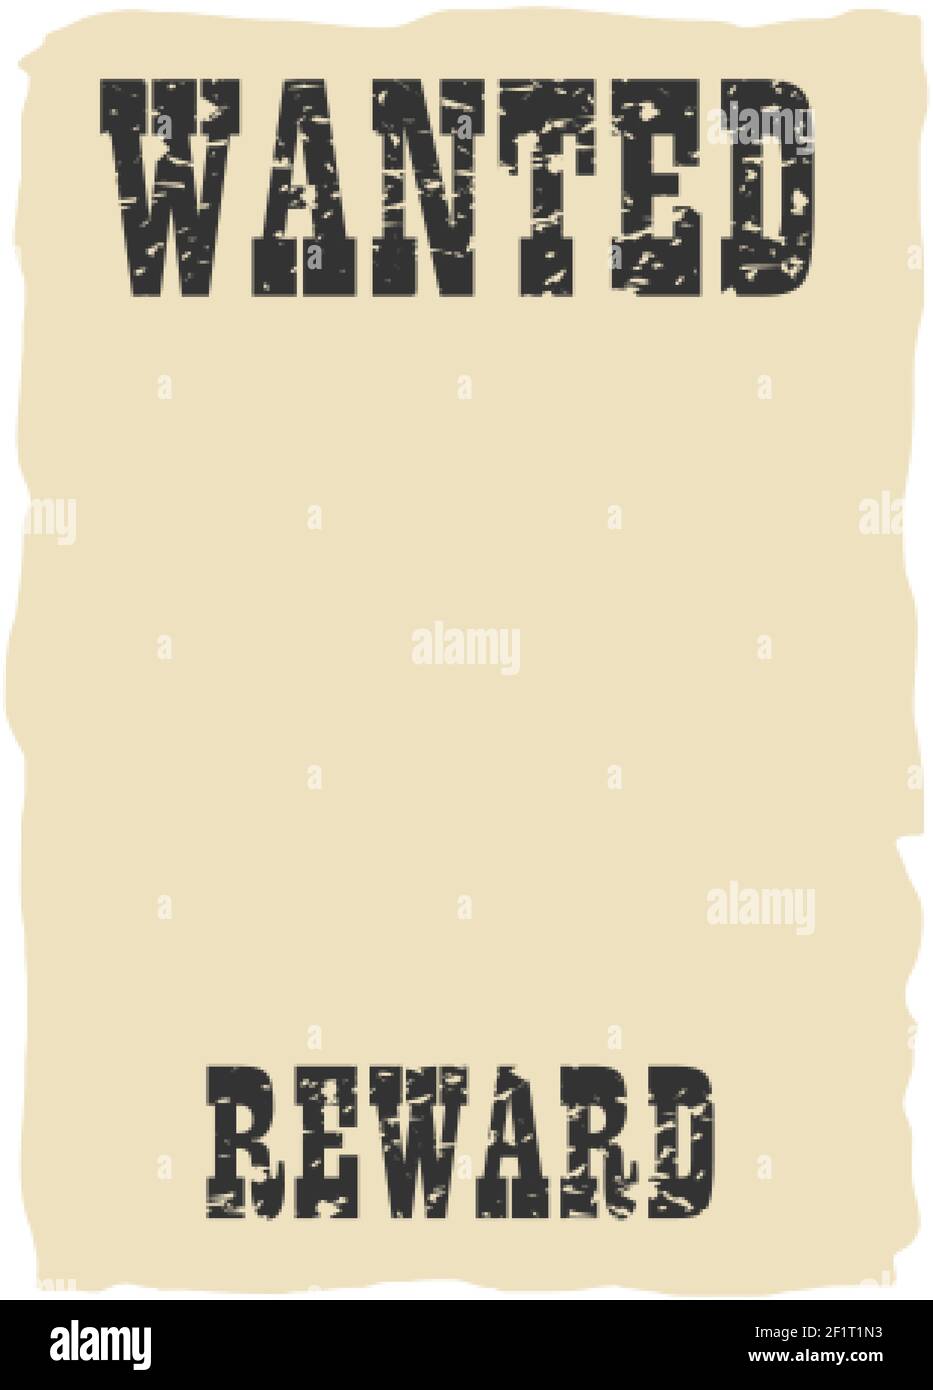 Western wanted dead or alive poster background Stock Vector